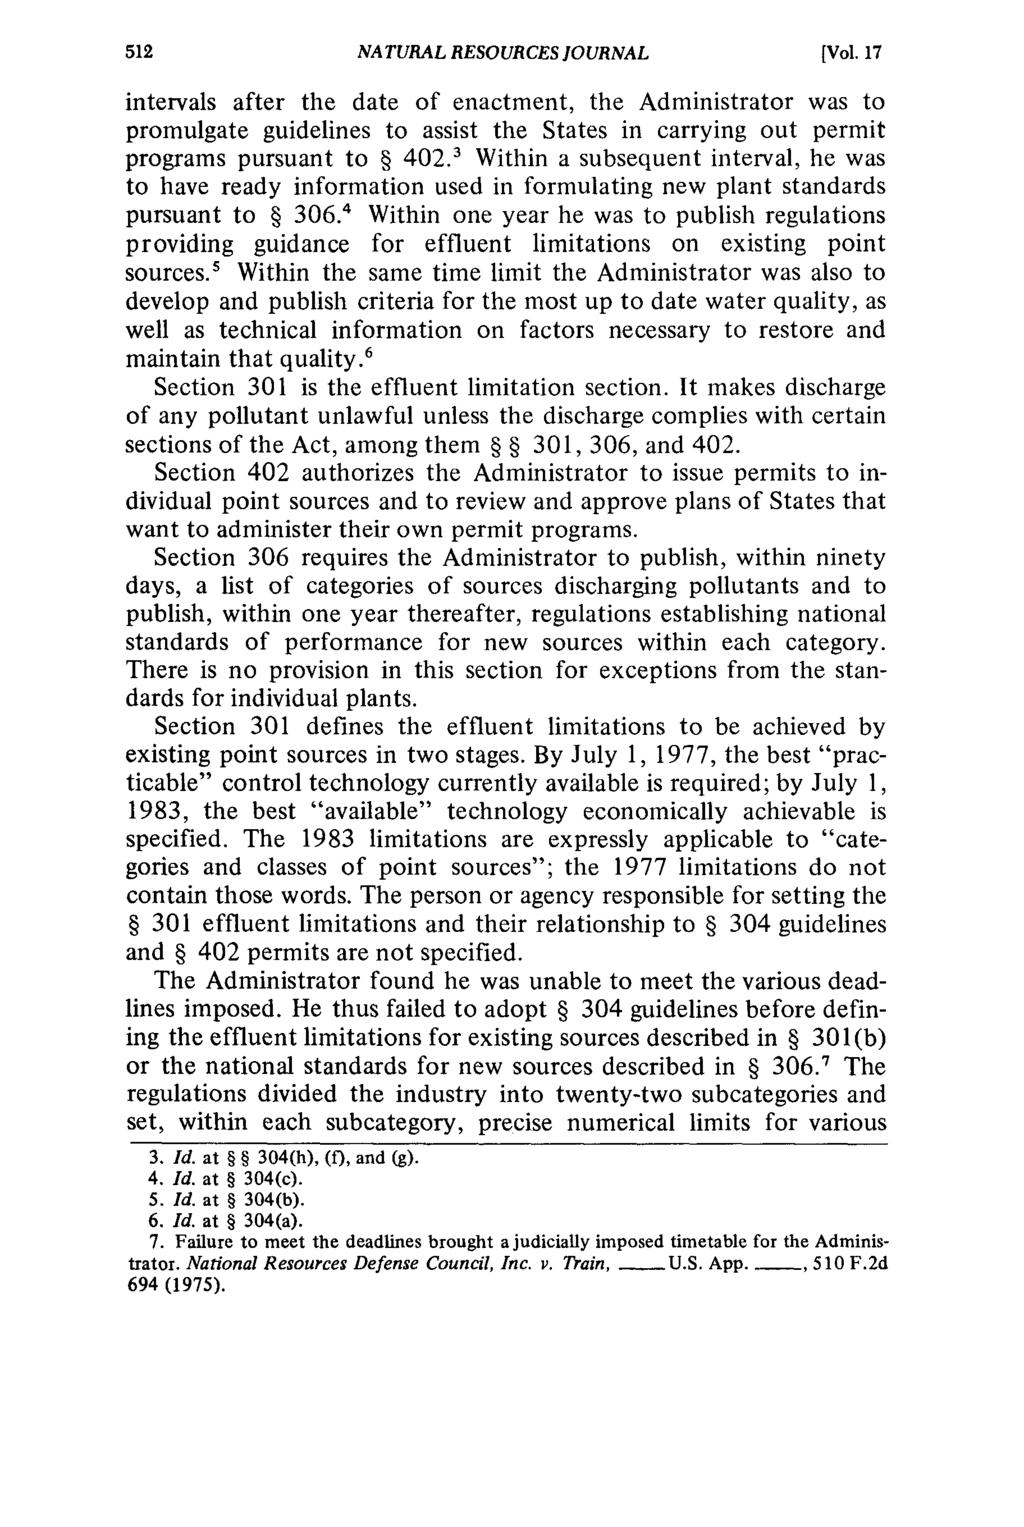 NATURAL RESOURCES JOURNAL [Vol. 17 intervals after the date of enactment, the Administrator was to promulgate guidelines to assist the States in carrying out permit programs pursuant to 402.